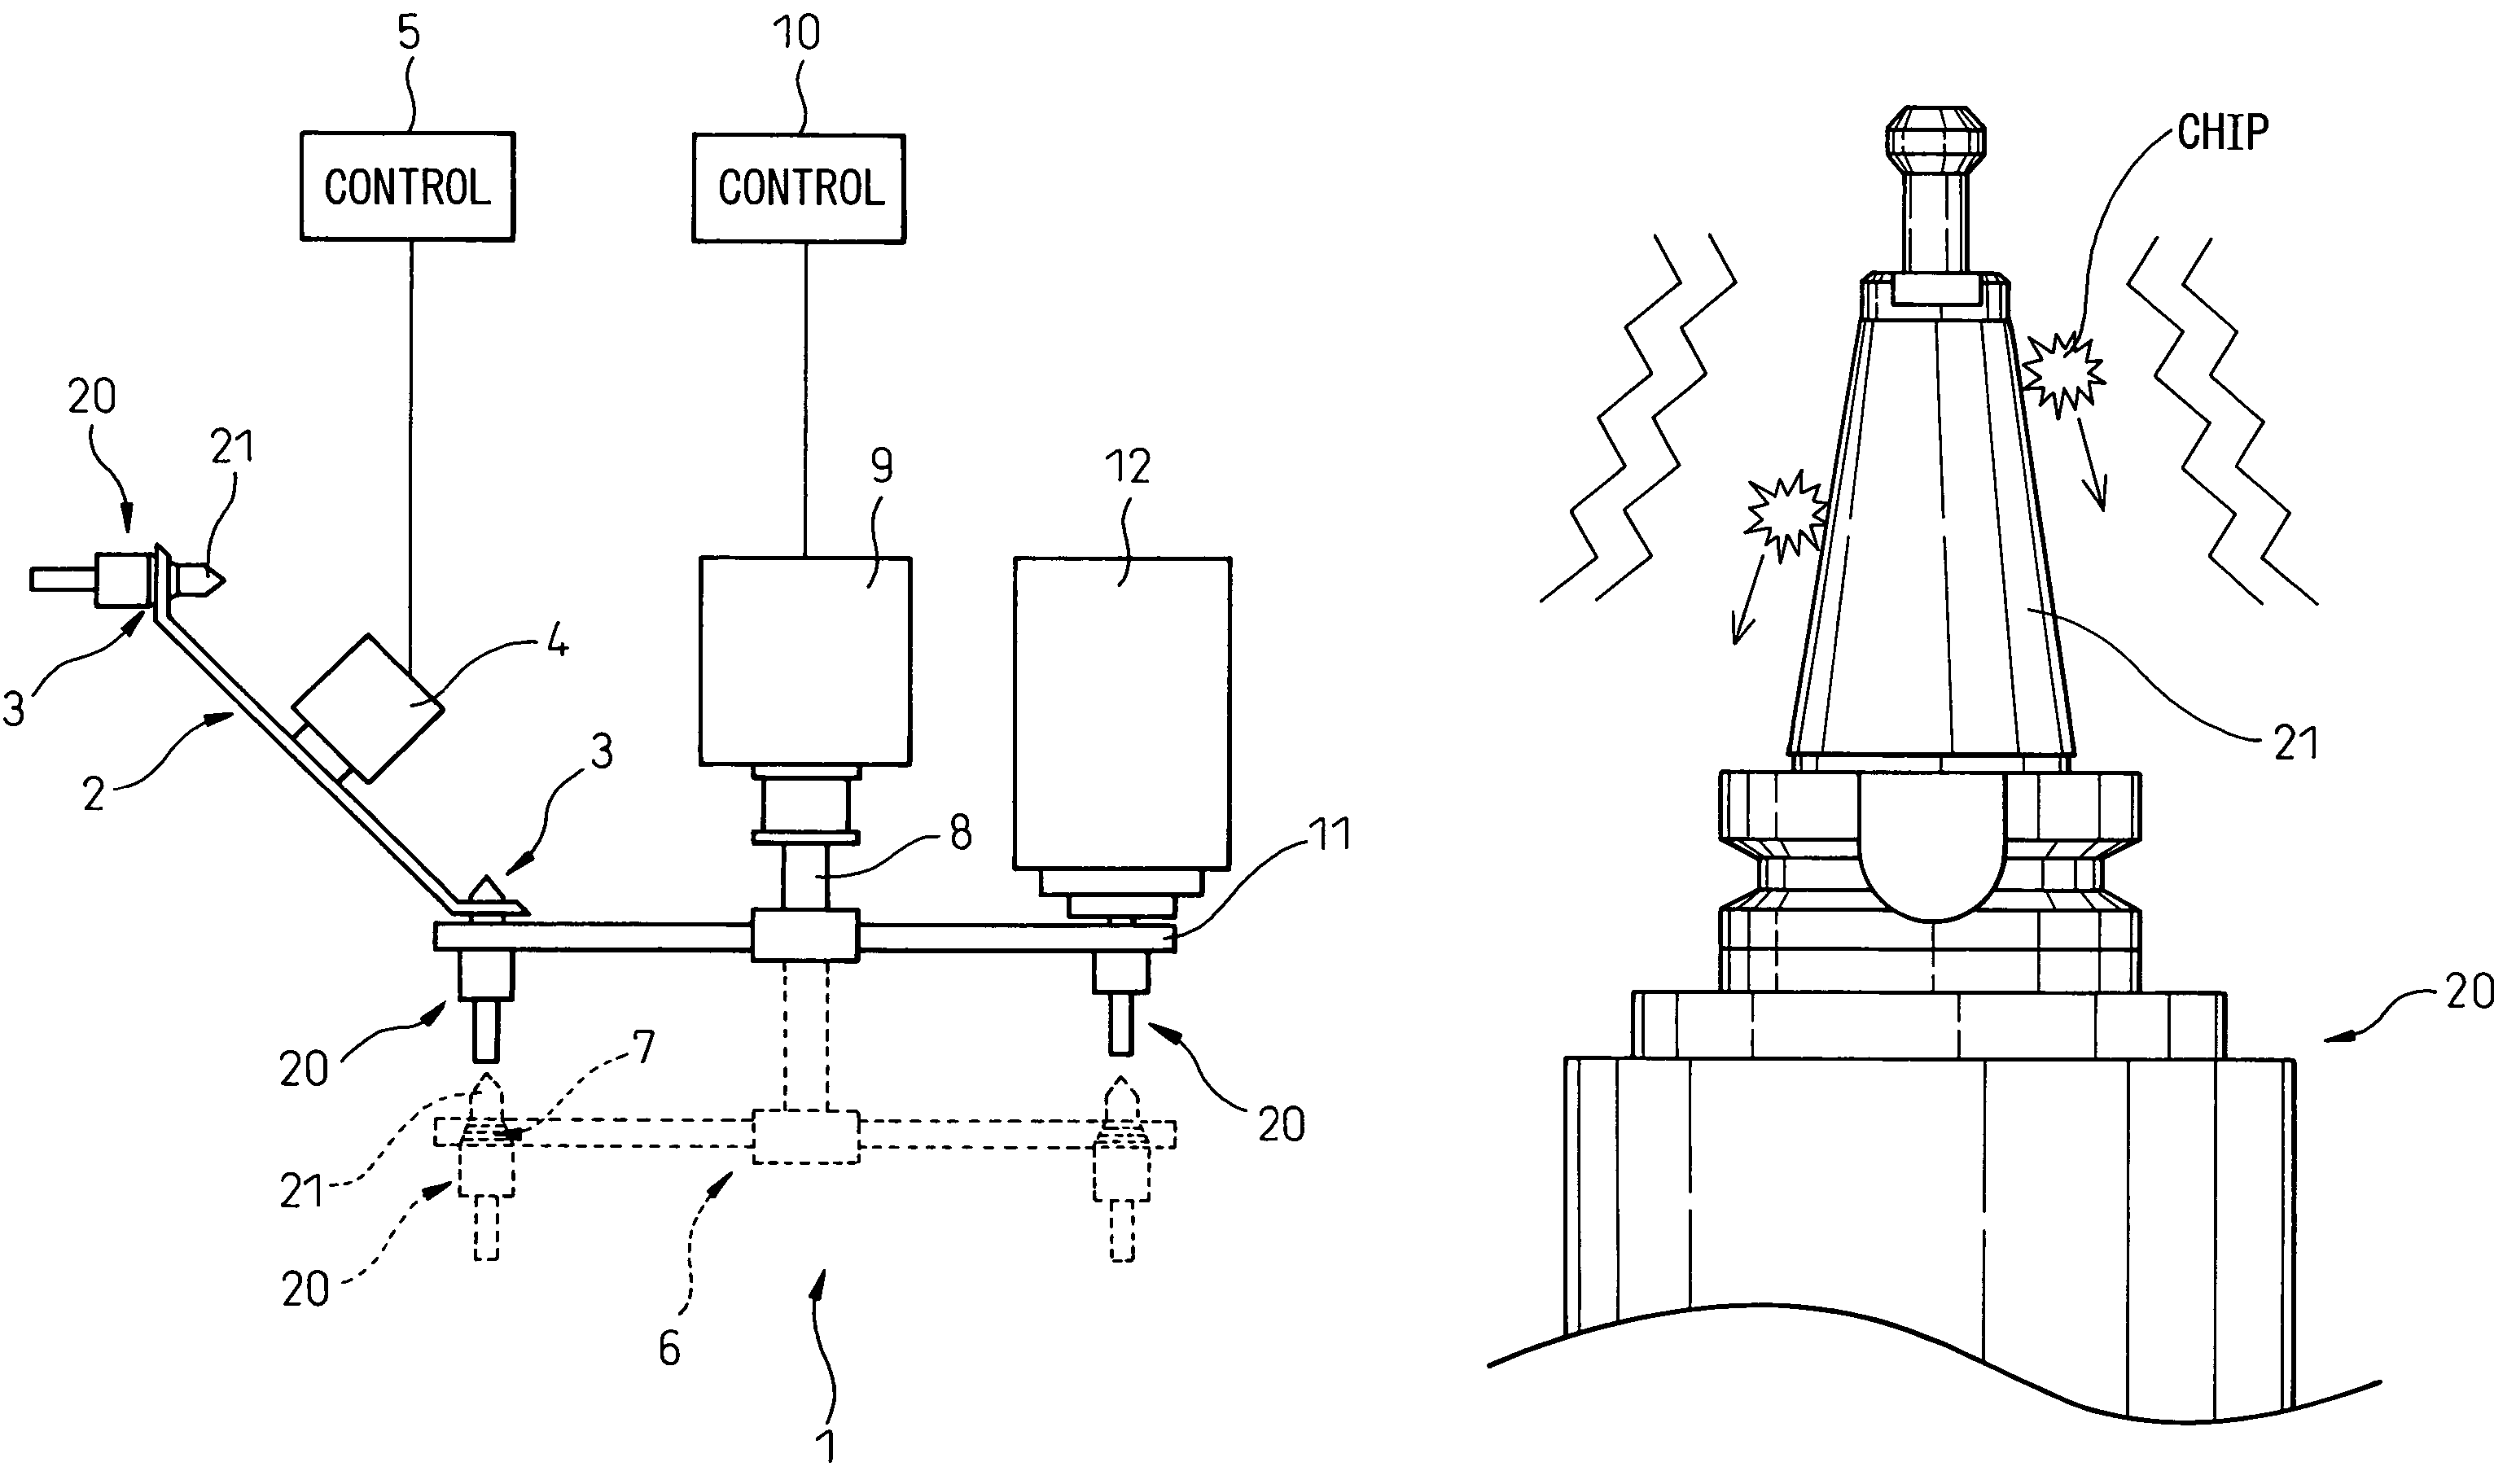 Tool changing device which prevents chips adhering to tool